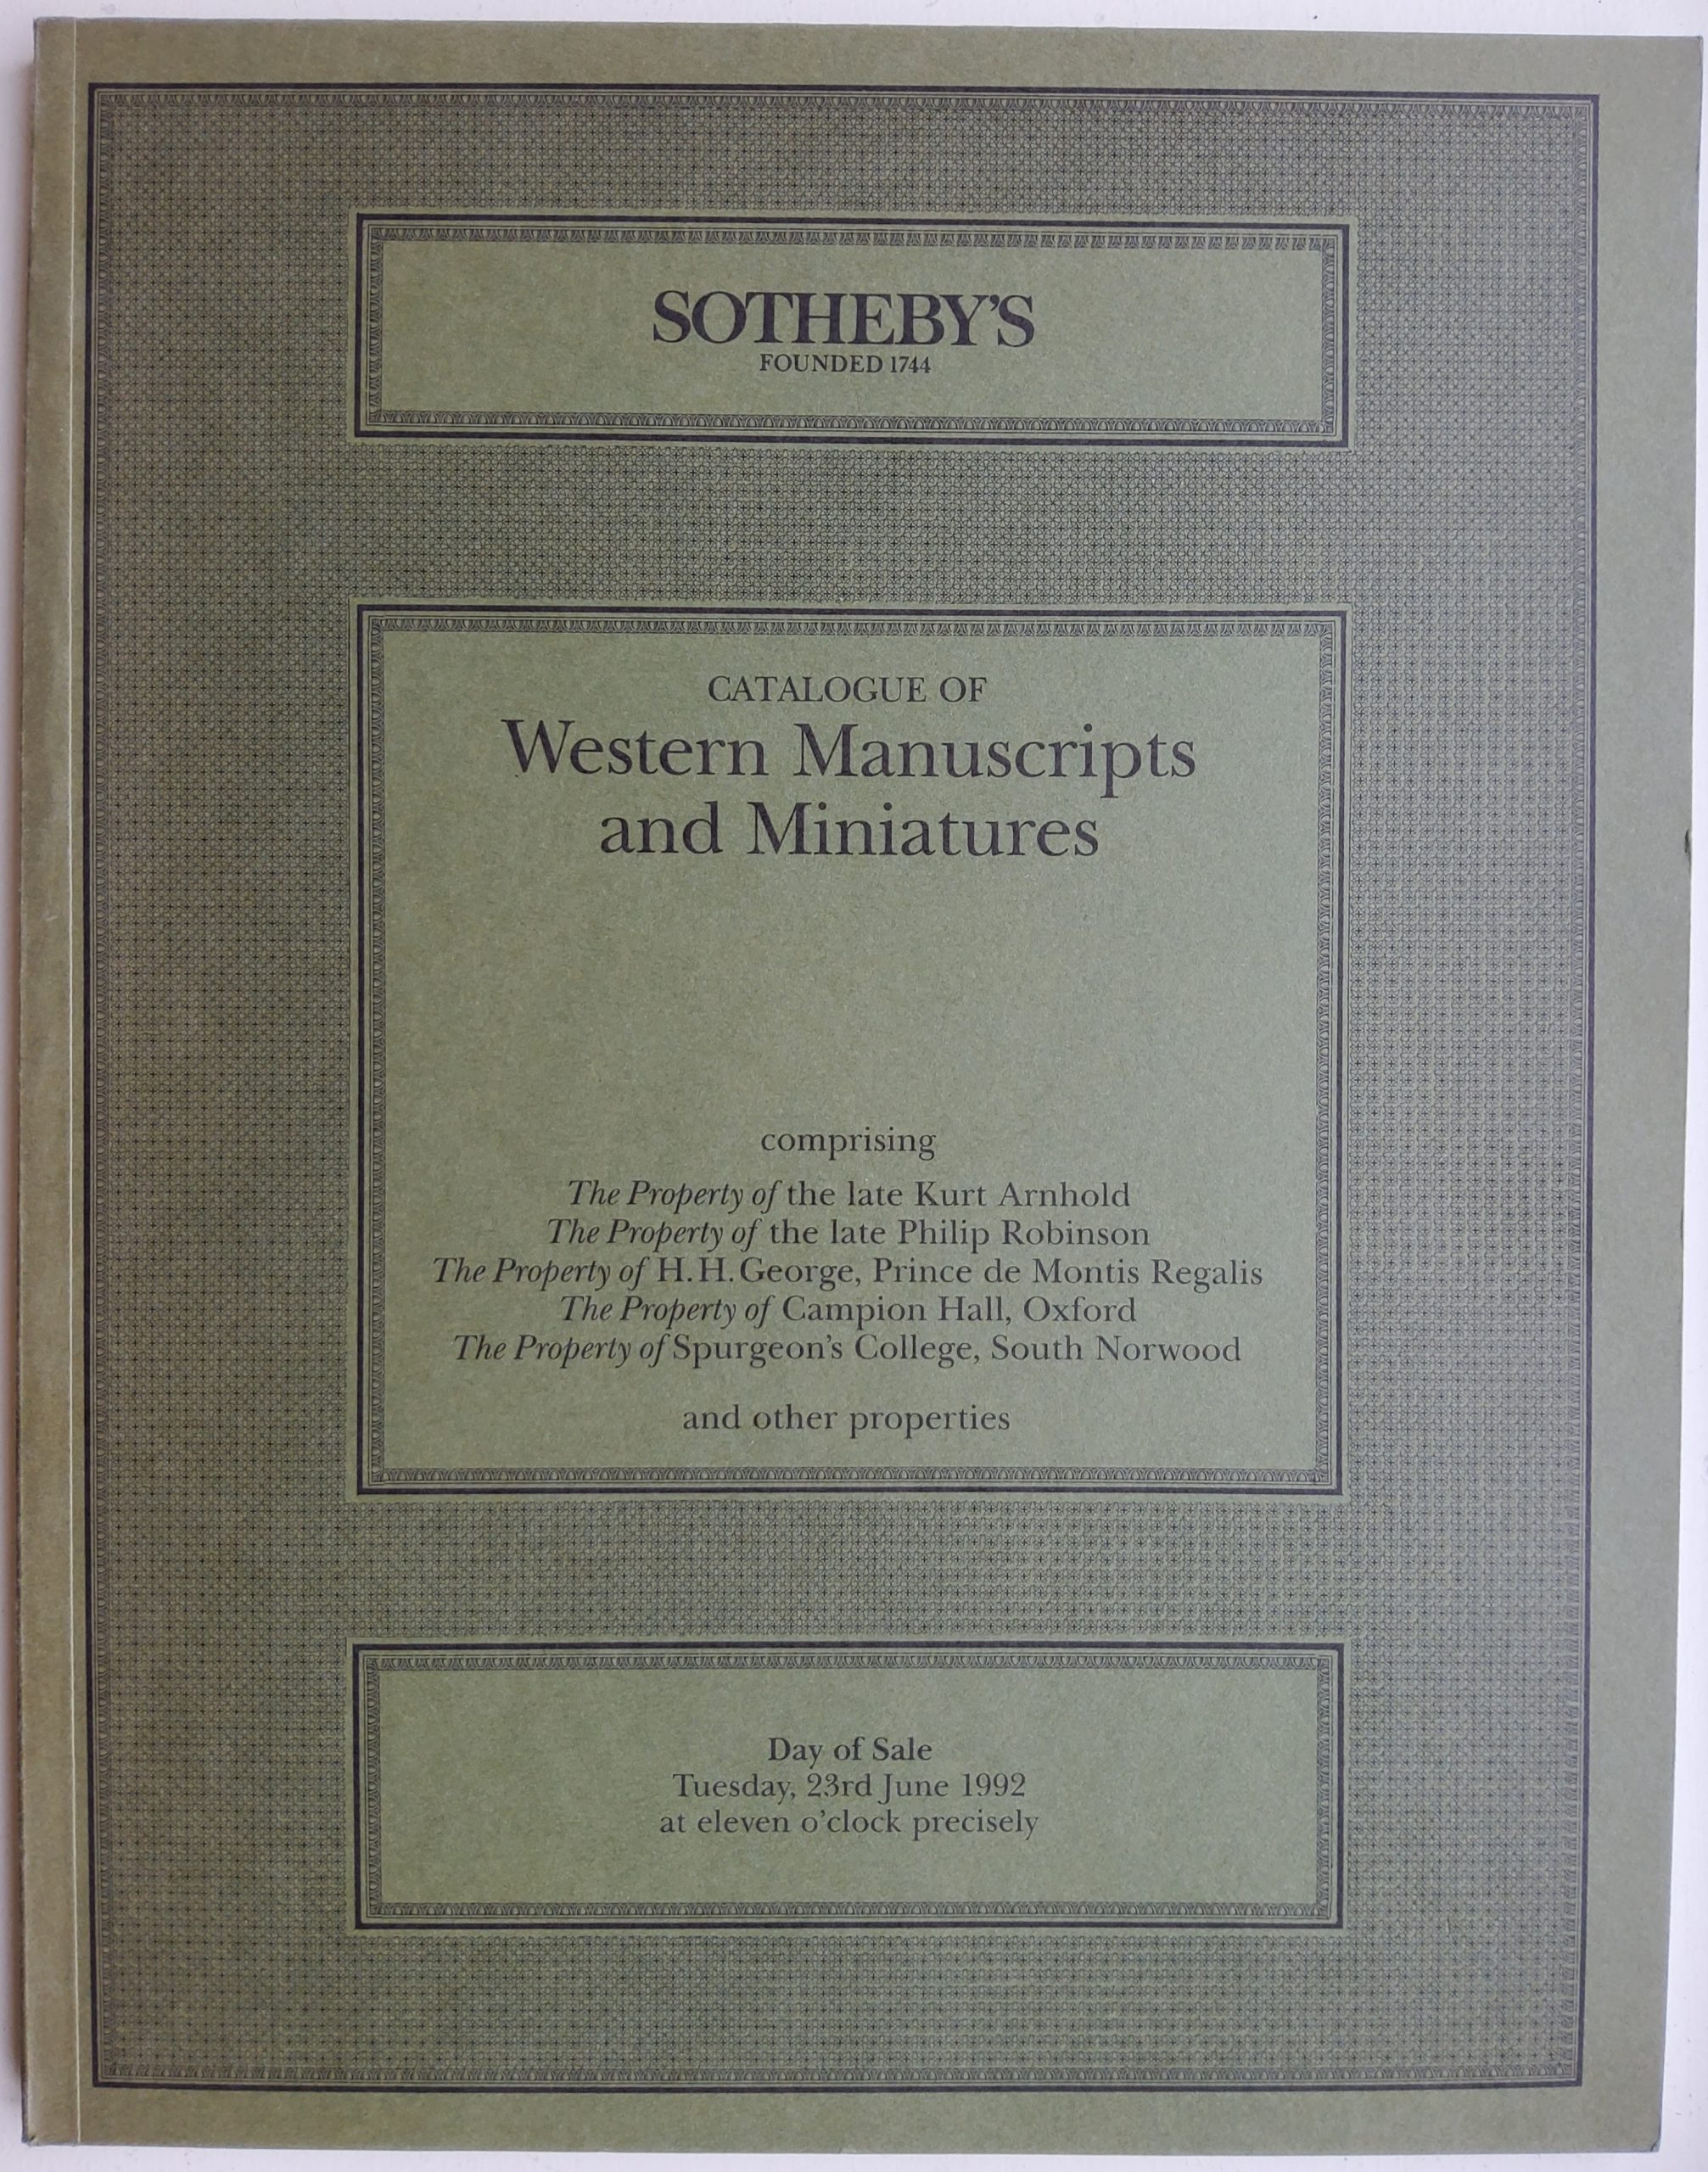 Sotheby’s Catalogue of Western Manuscripts and Miniatures 23 June 1992.